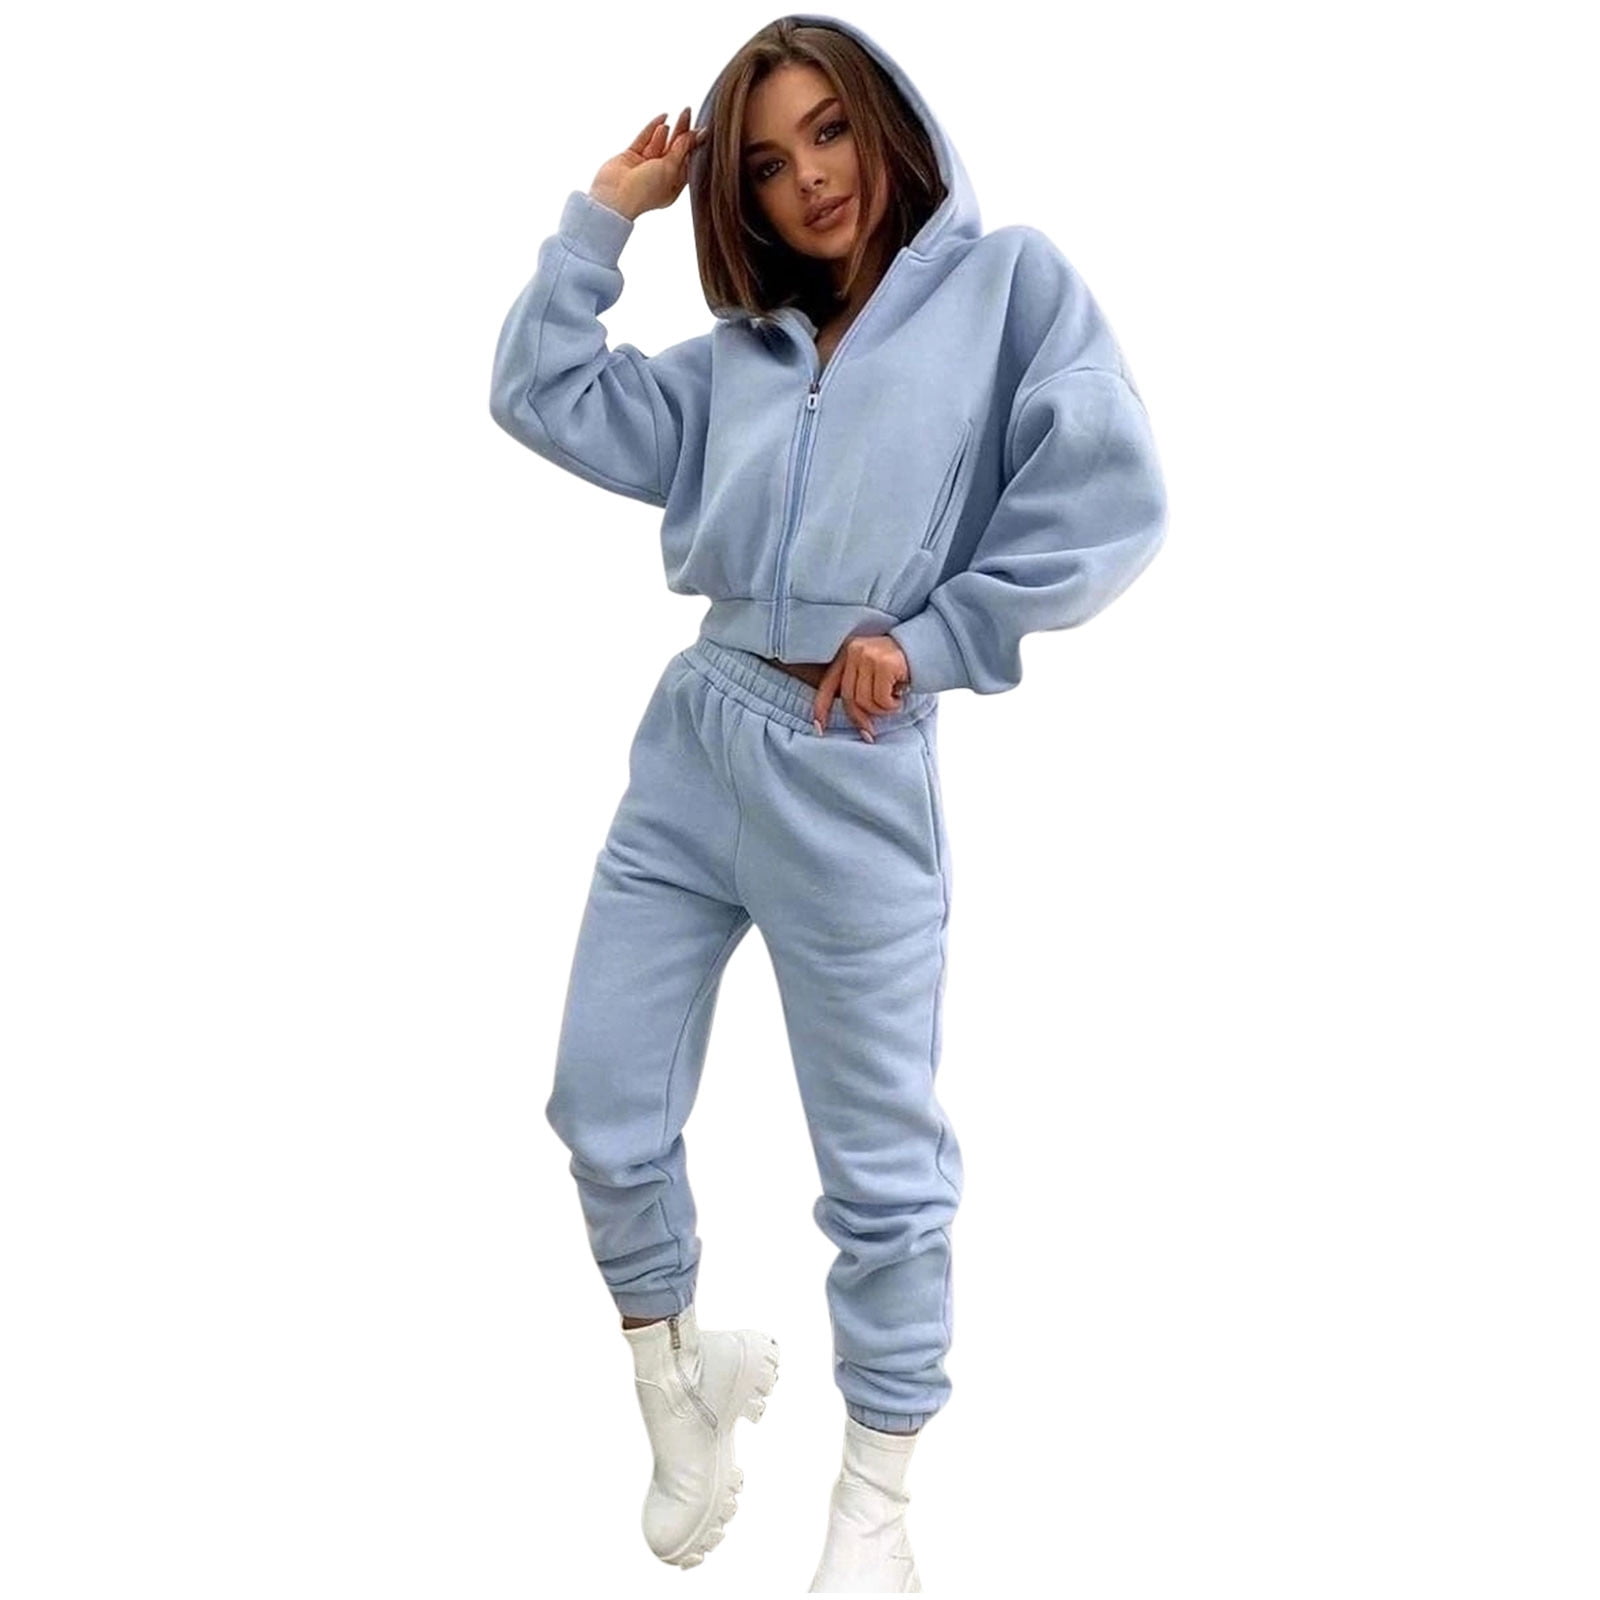 Fruity bungee jump Ejendommelige RQYYD Jogging Suits for Women Two Piece Sweatsuit Zipper Pullover Hoodie  Long Pants Tracksuit Set 2 Piece Workout Track Suit Outfit with Pocket Light  Blue S - Walmart.com